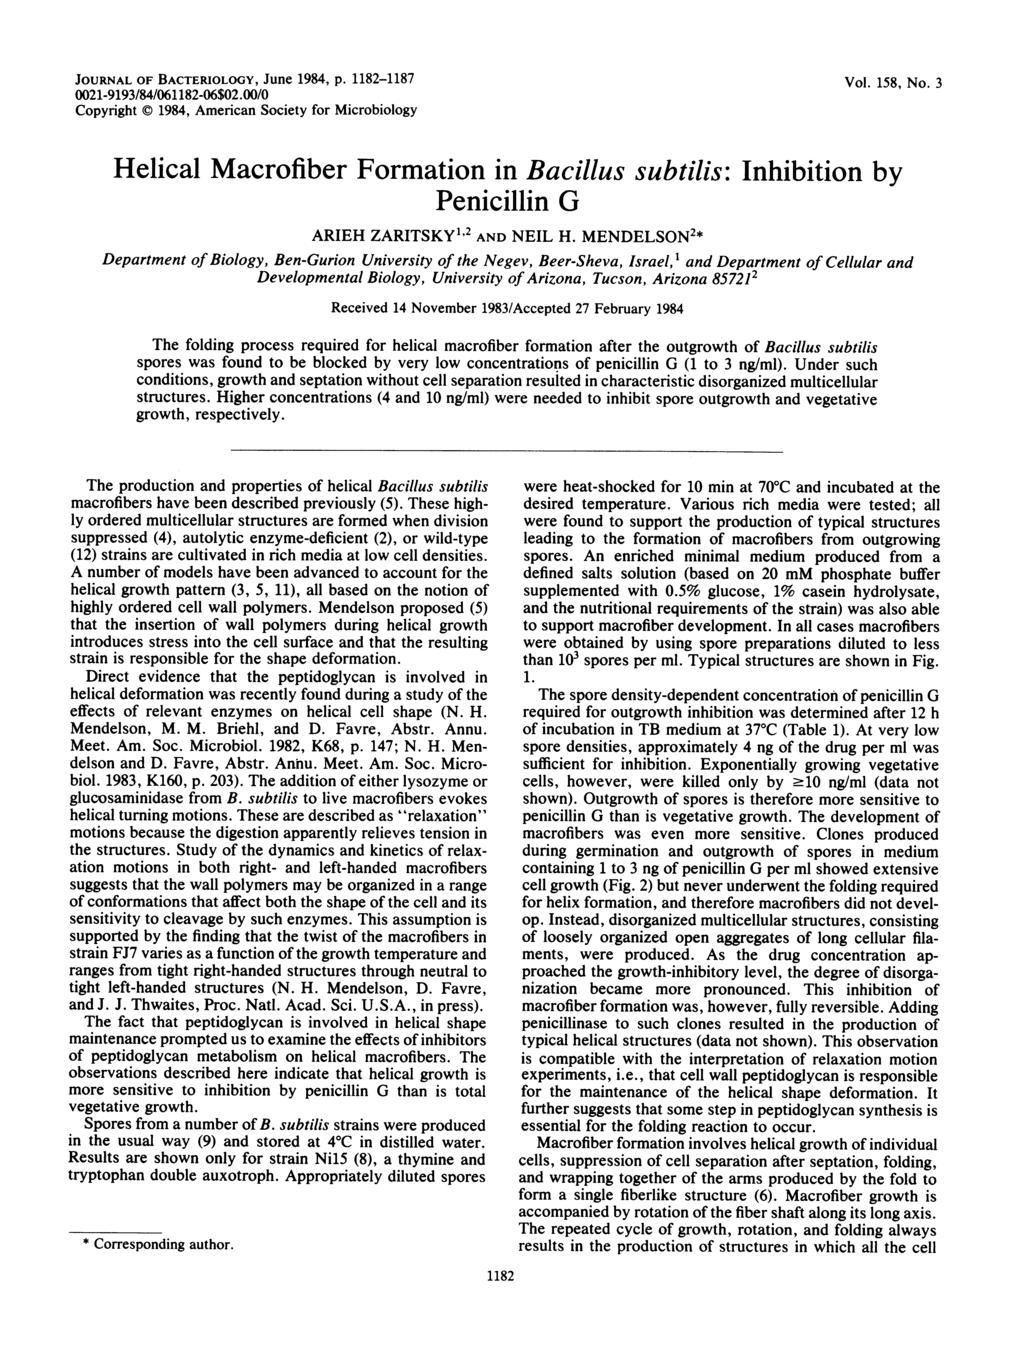 JOURNAL OF BACTERIOLOGY, June 1984, p. 1182-1187 0021-9193/84/061182-06$02.00/0 Copyright C 1984, American Society for Microbiology Vol. 158, No.